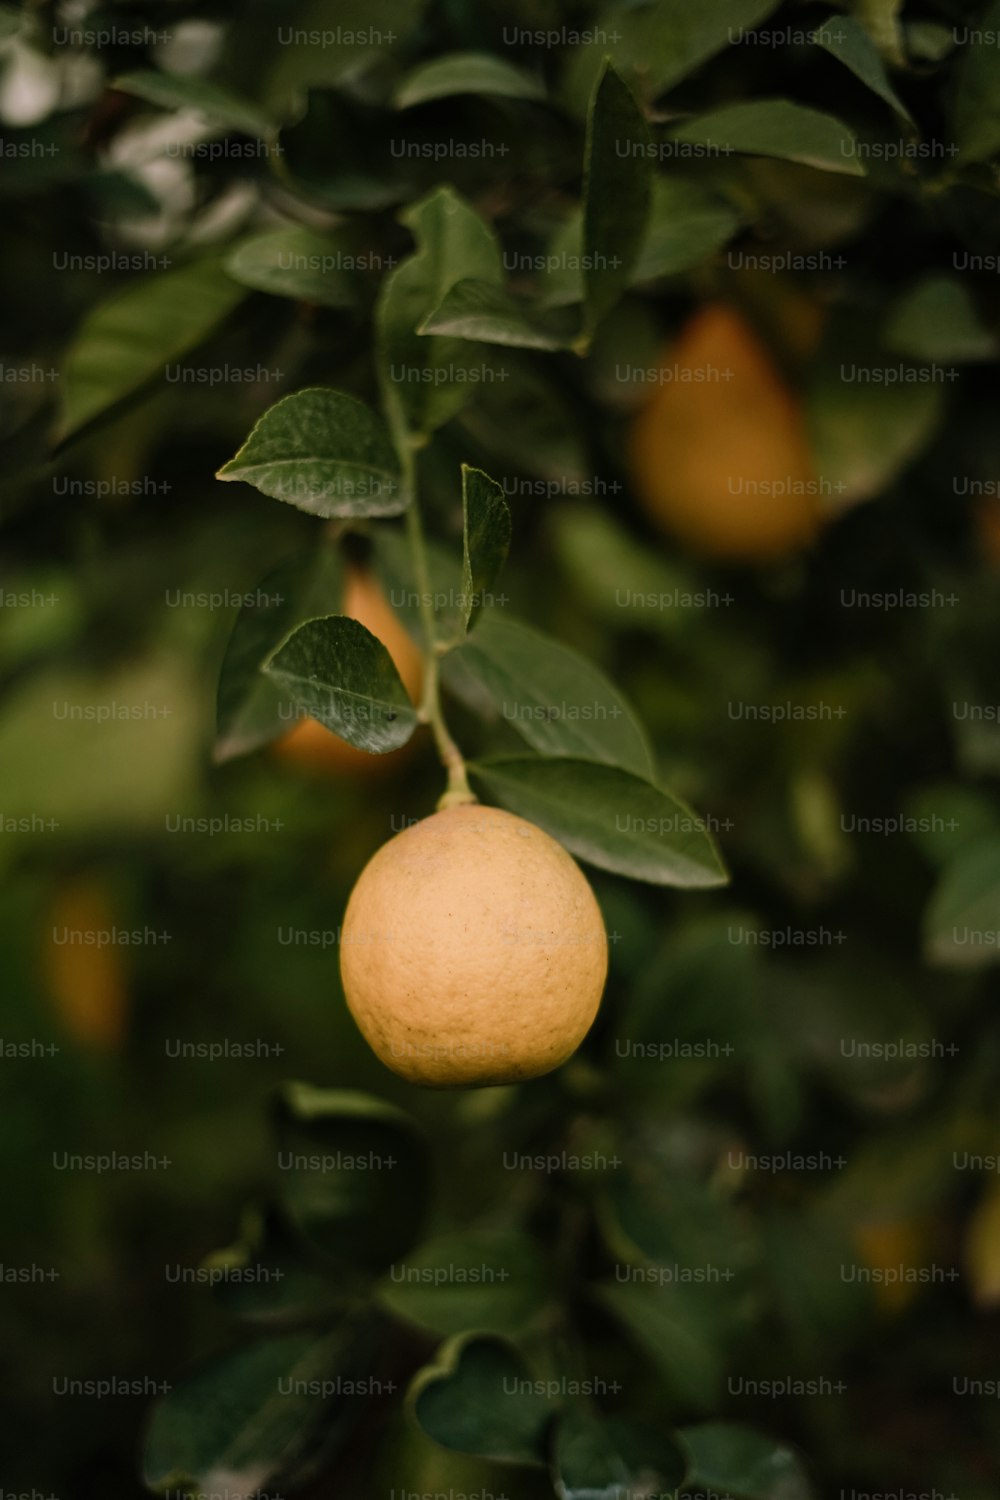 a close up of an orange on a tree